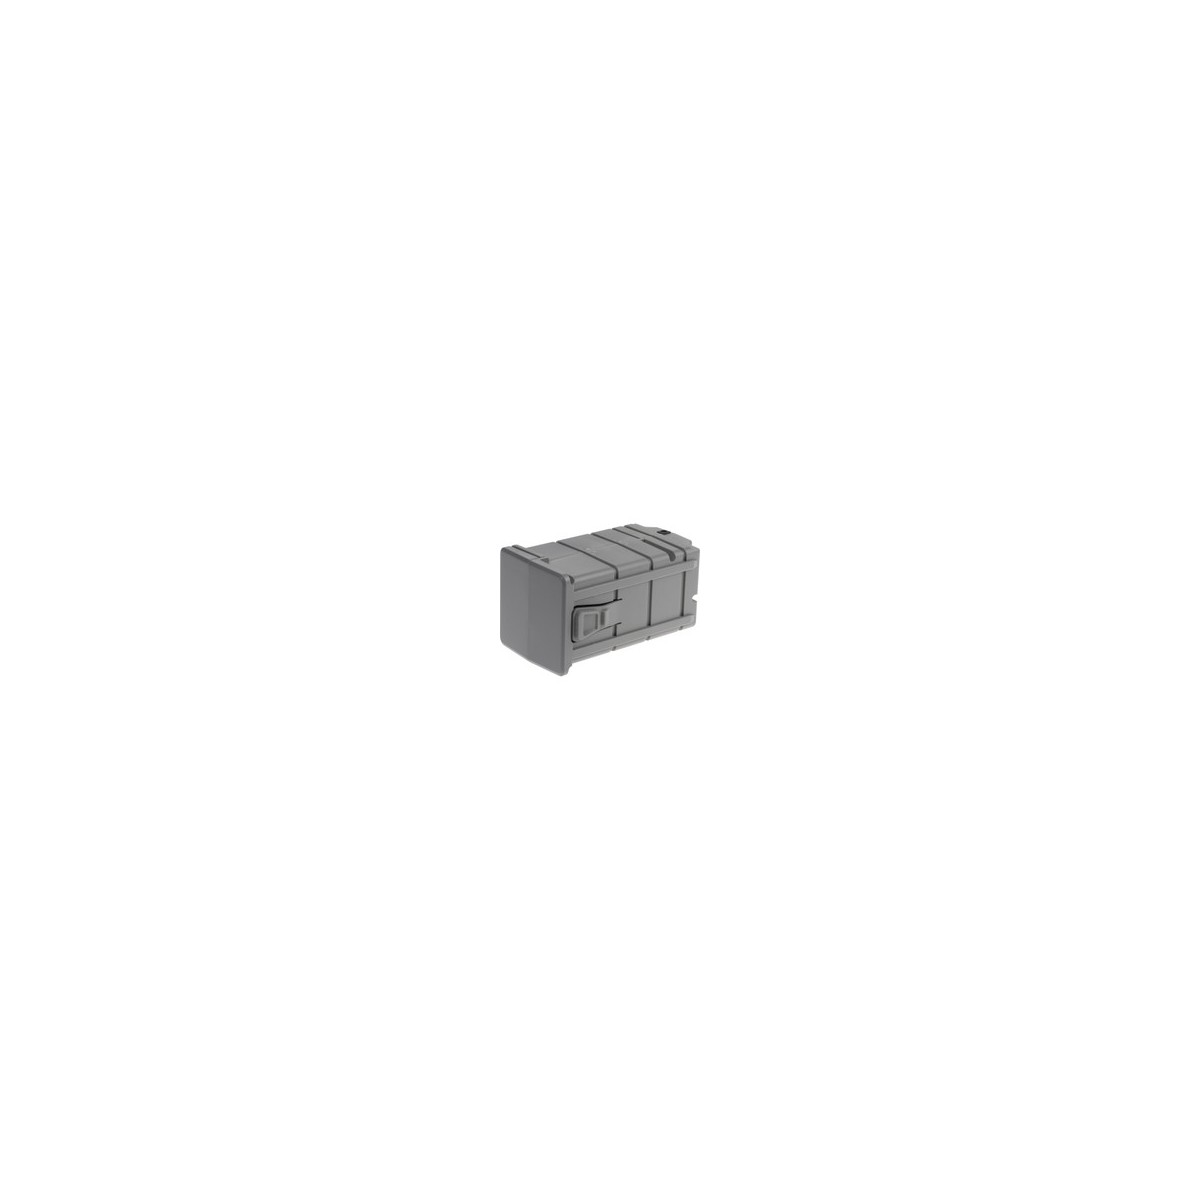 Axis 5506-551 - Battery - 3.4 Ah - 12 V - AXIS T8415 - Grey - 1 pc(s)